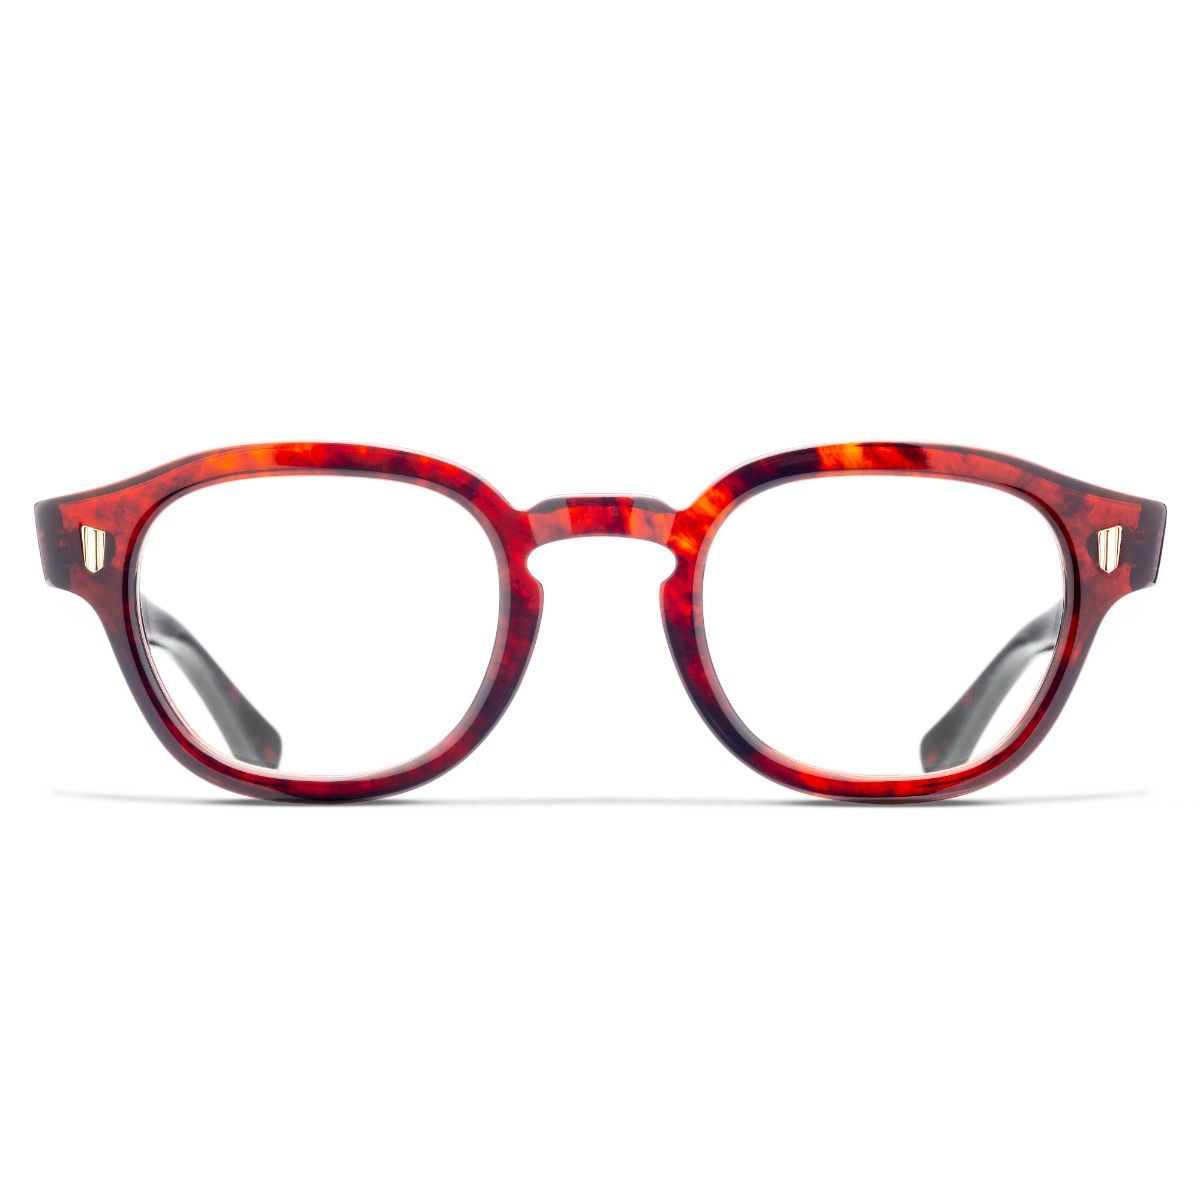 9290 Optical Round Glasses - Red Havana by Cutler and Gross